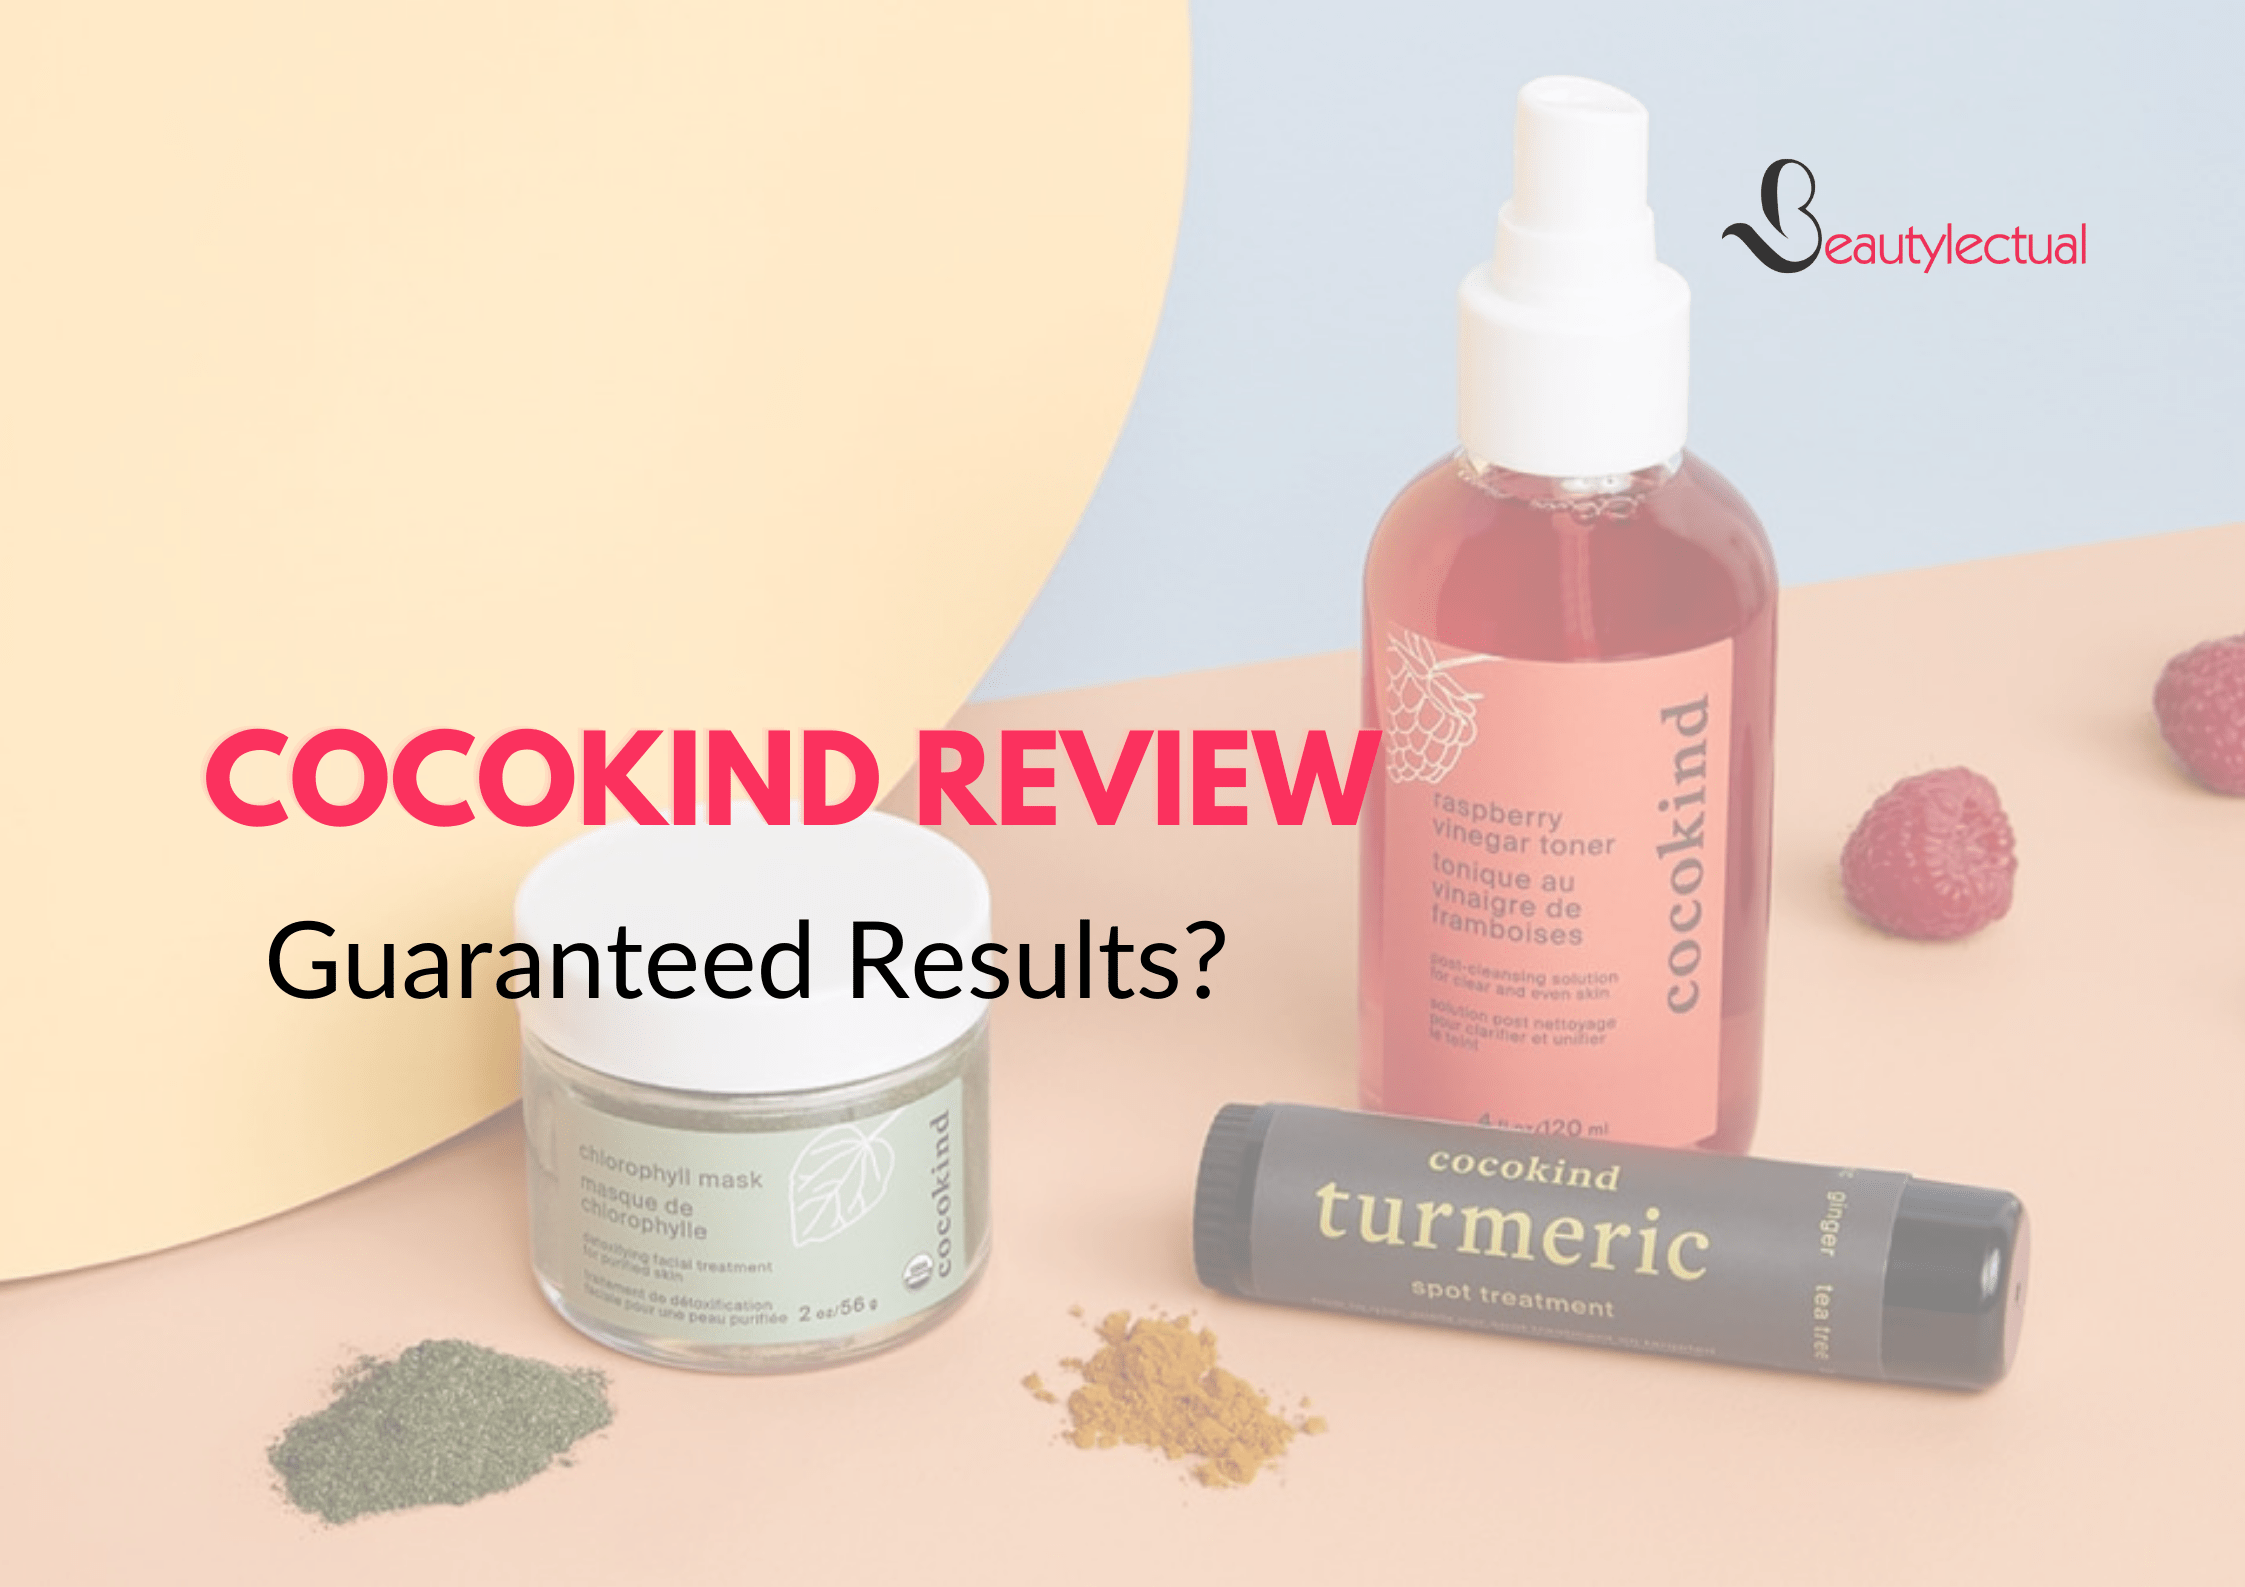 COCOKIND REVIEWs